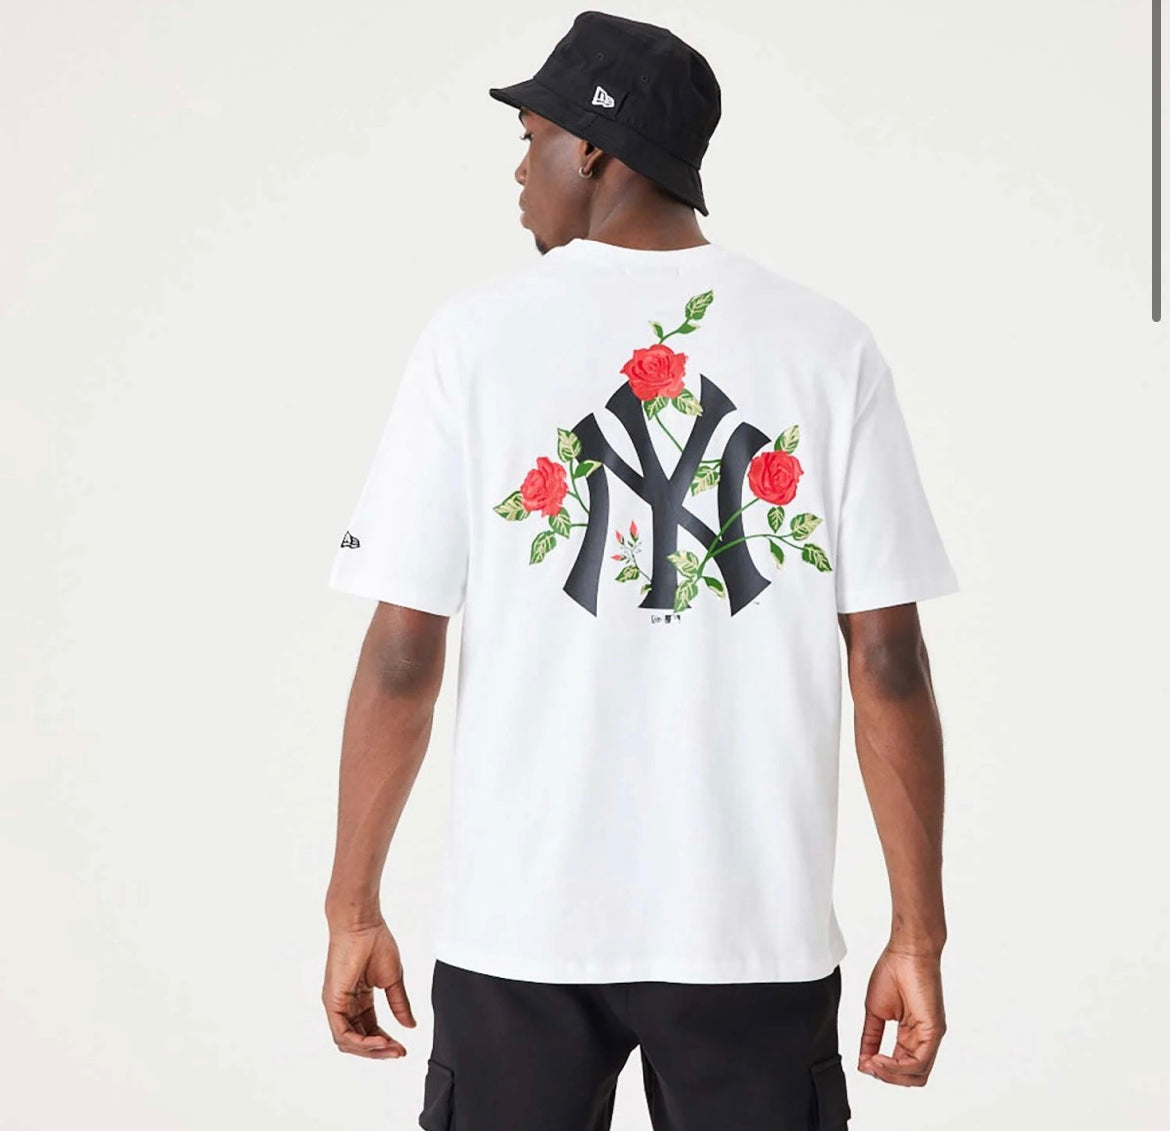 MLB floral graphic tee